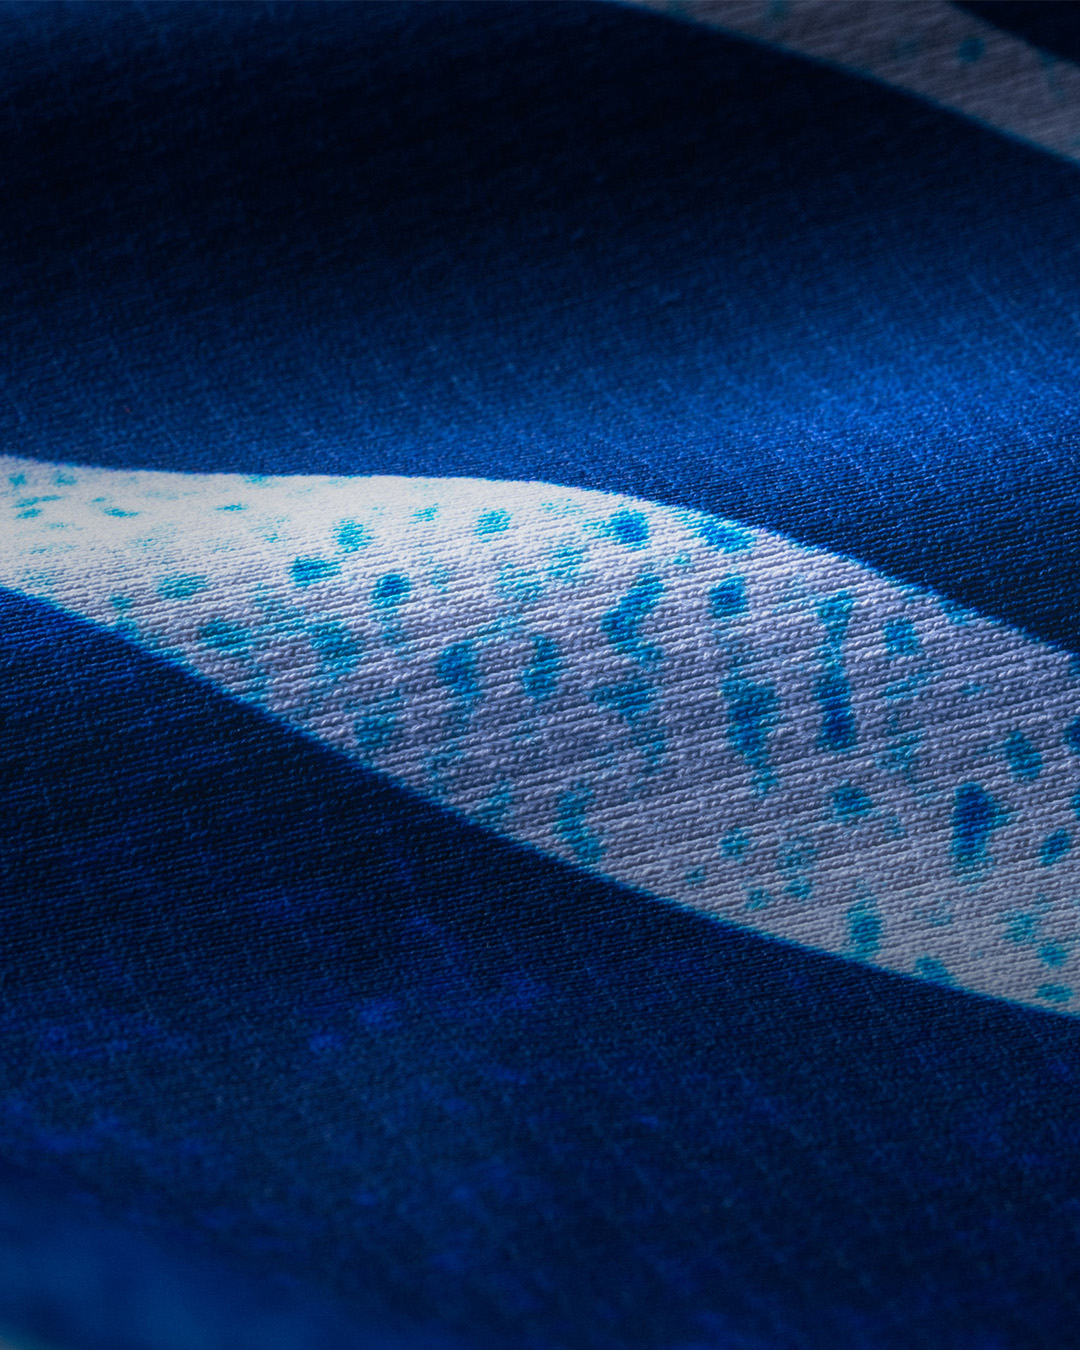 Close-up of textured fabric with abstract design, relevant for fashion discussion